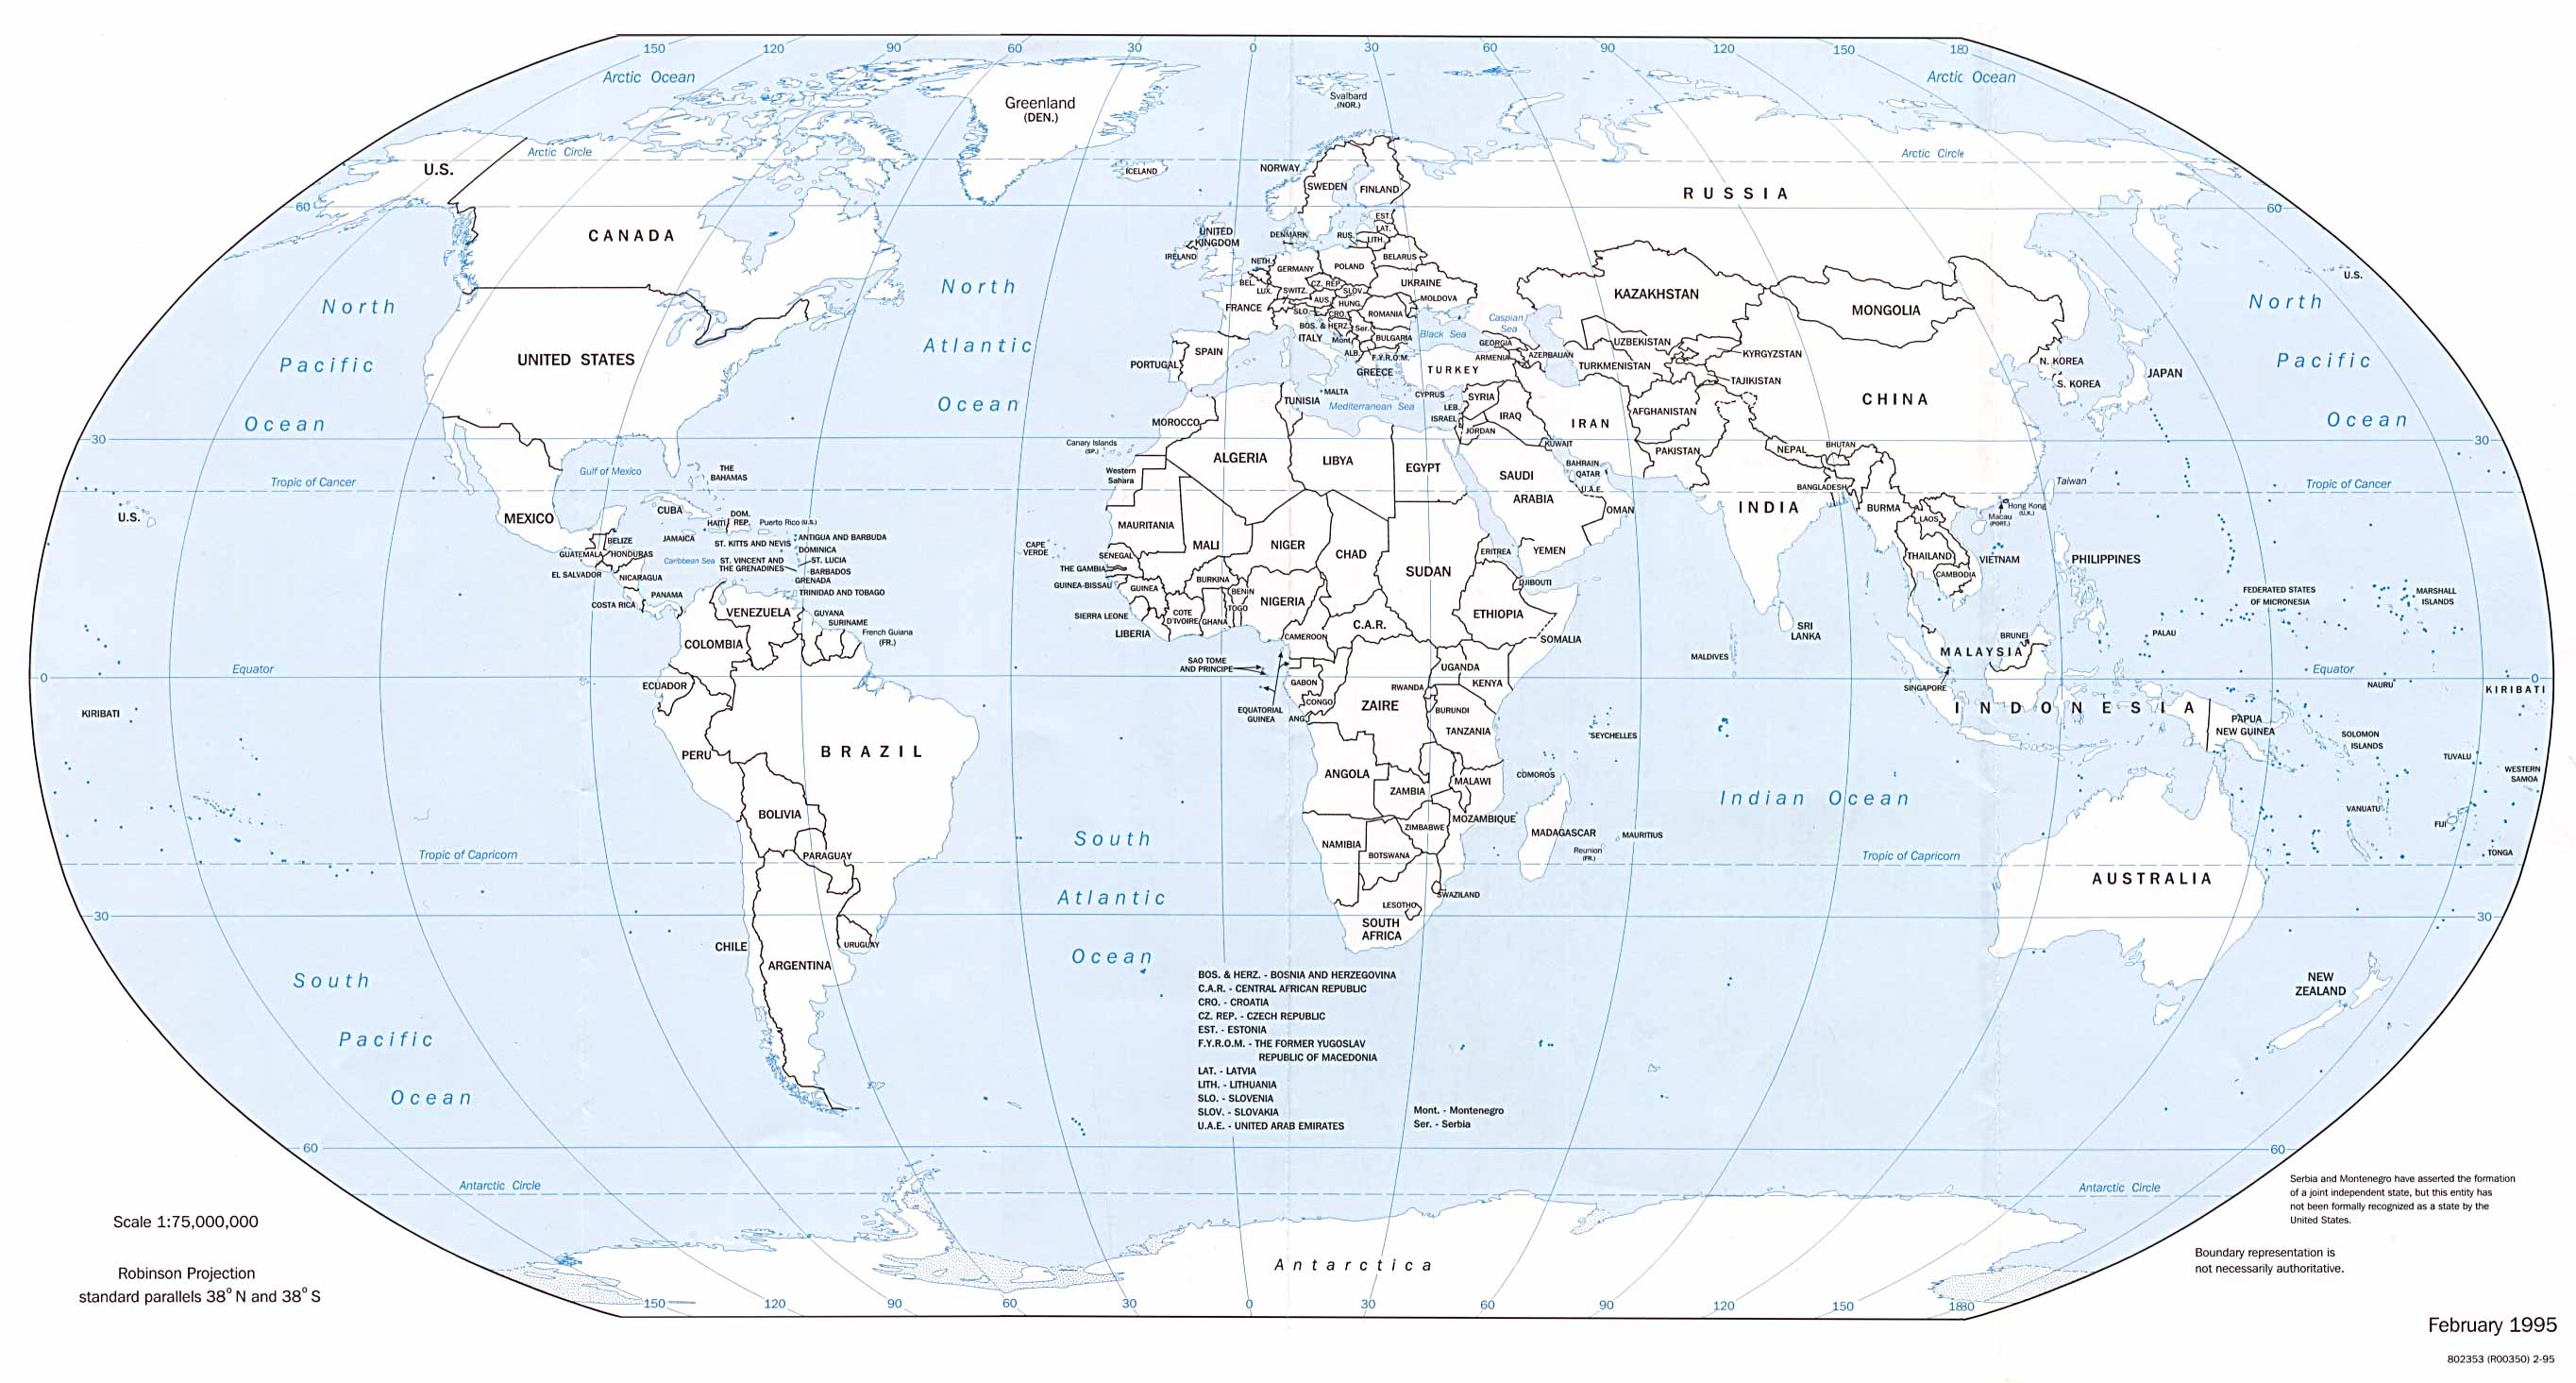 Free Printable World Map With Countries Labeled And Travel - Free Printable World Map With Countries Labeled